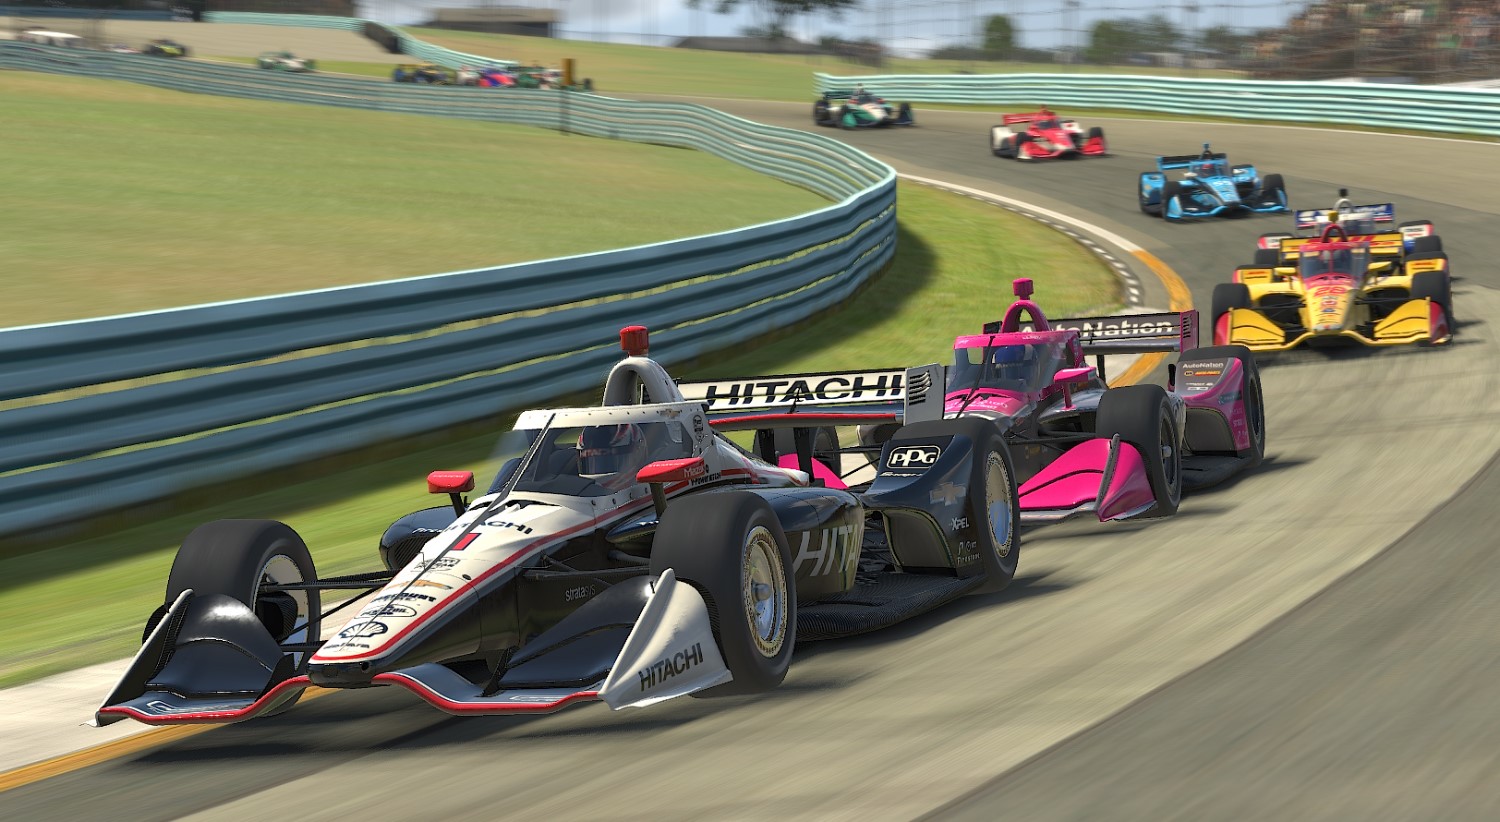 The iRacing platform is the best and IndyCar and NASCAR put on the best shows